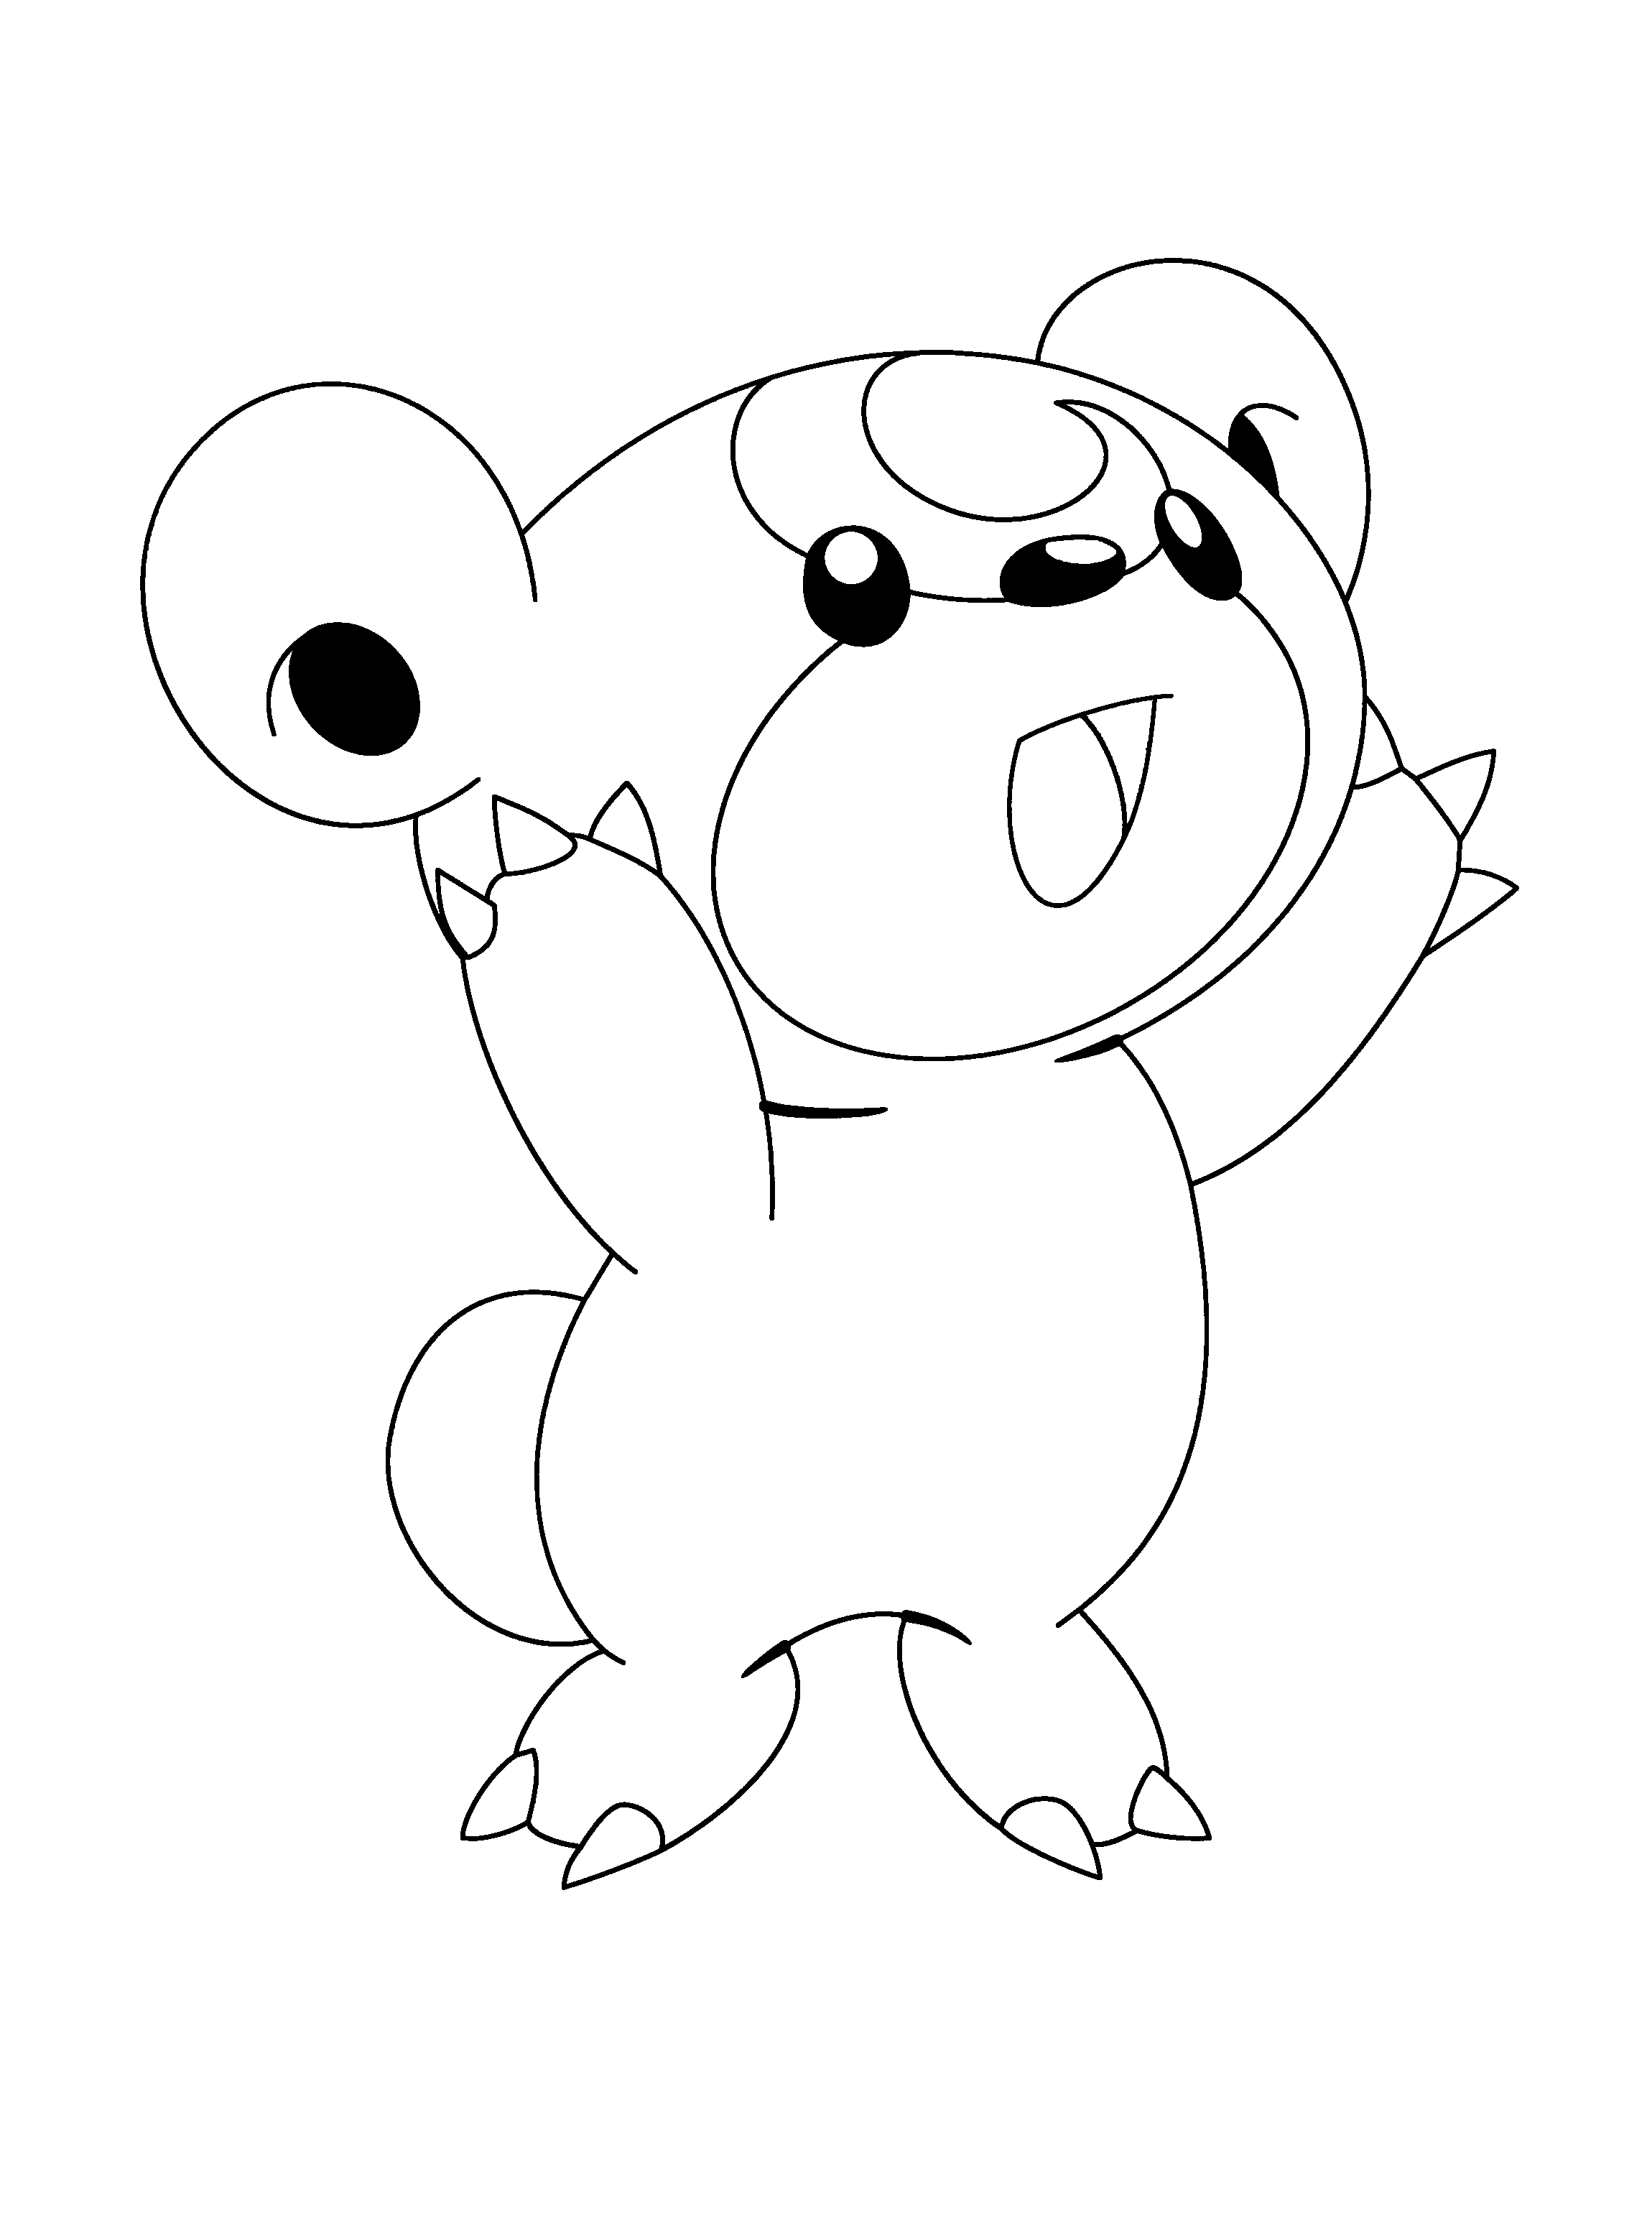 Pokemon Coloring Pages | sidstudies.com